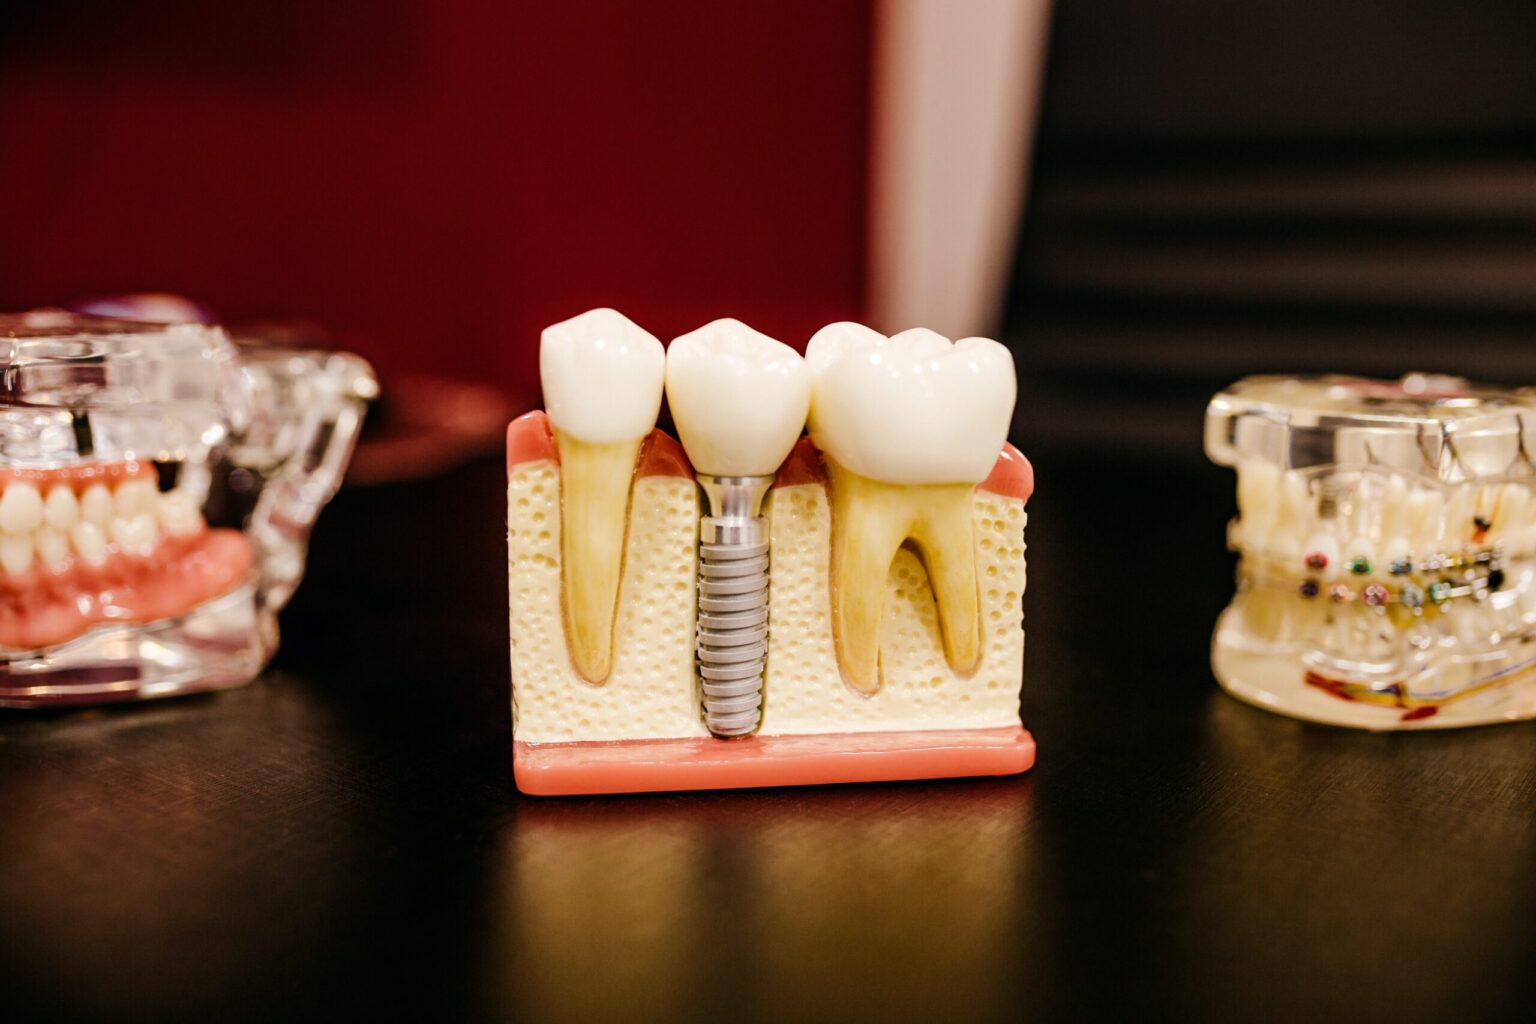 Dental implant model showcasing a titanium screw placed in a jawbone with an artificial tooth atop by a Dallas dentist.